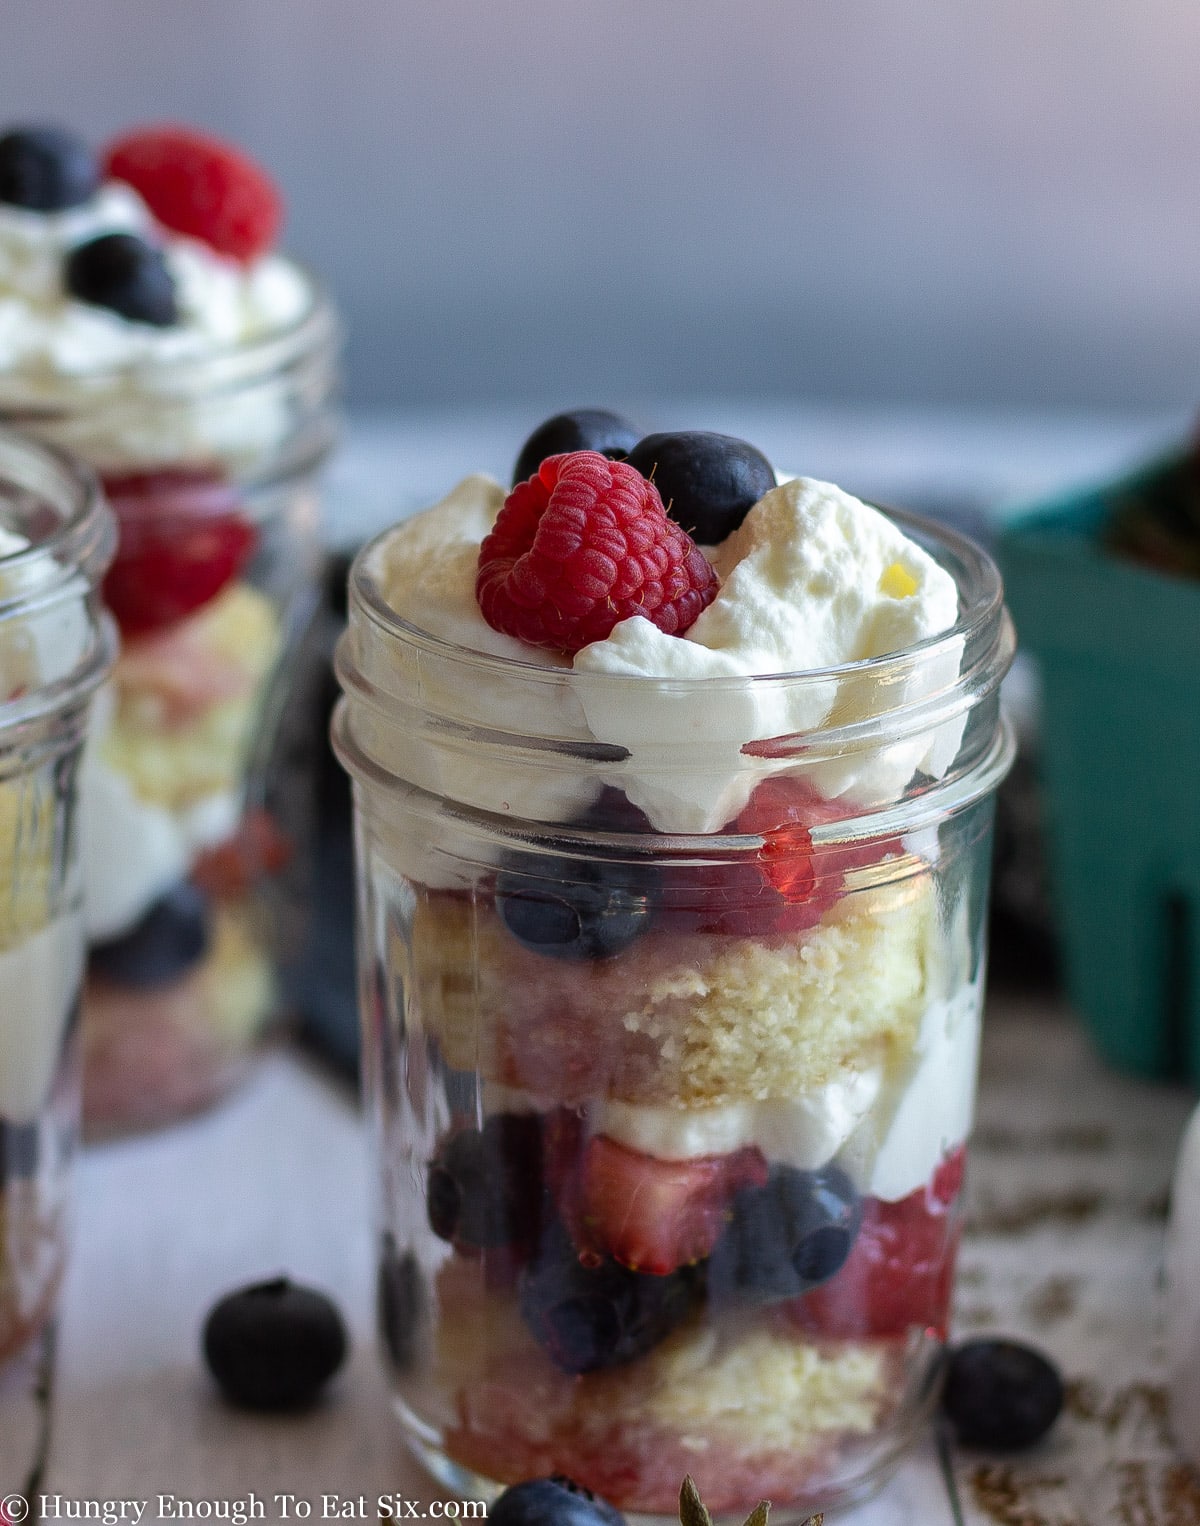 Trifle of cream, shortcake, and berries in a clear jar.